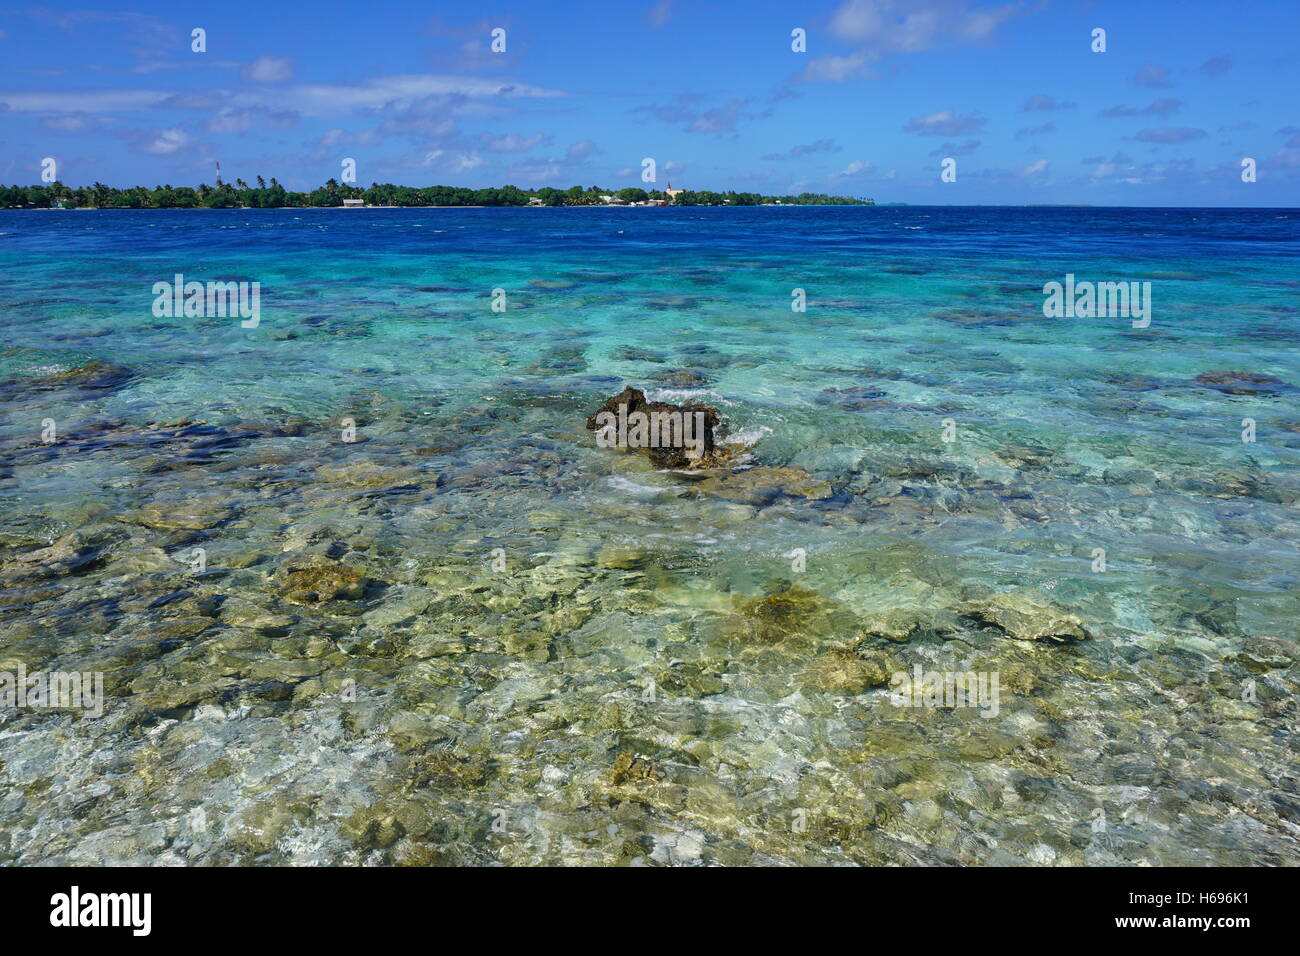 The Tiputa channel with its village on the other side, atoll of Rangiroa, Tuamotu archipelago, French Polynesia, Pacific ocean Stock Photo